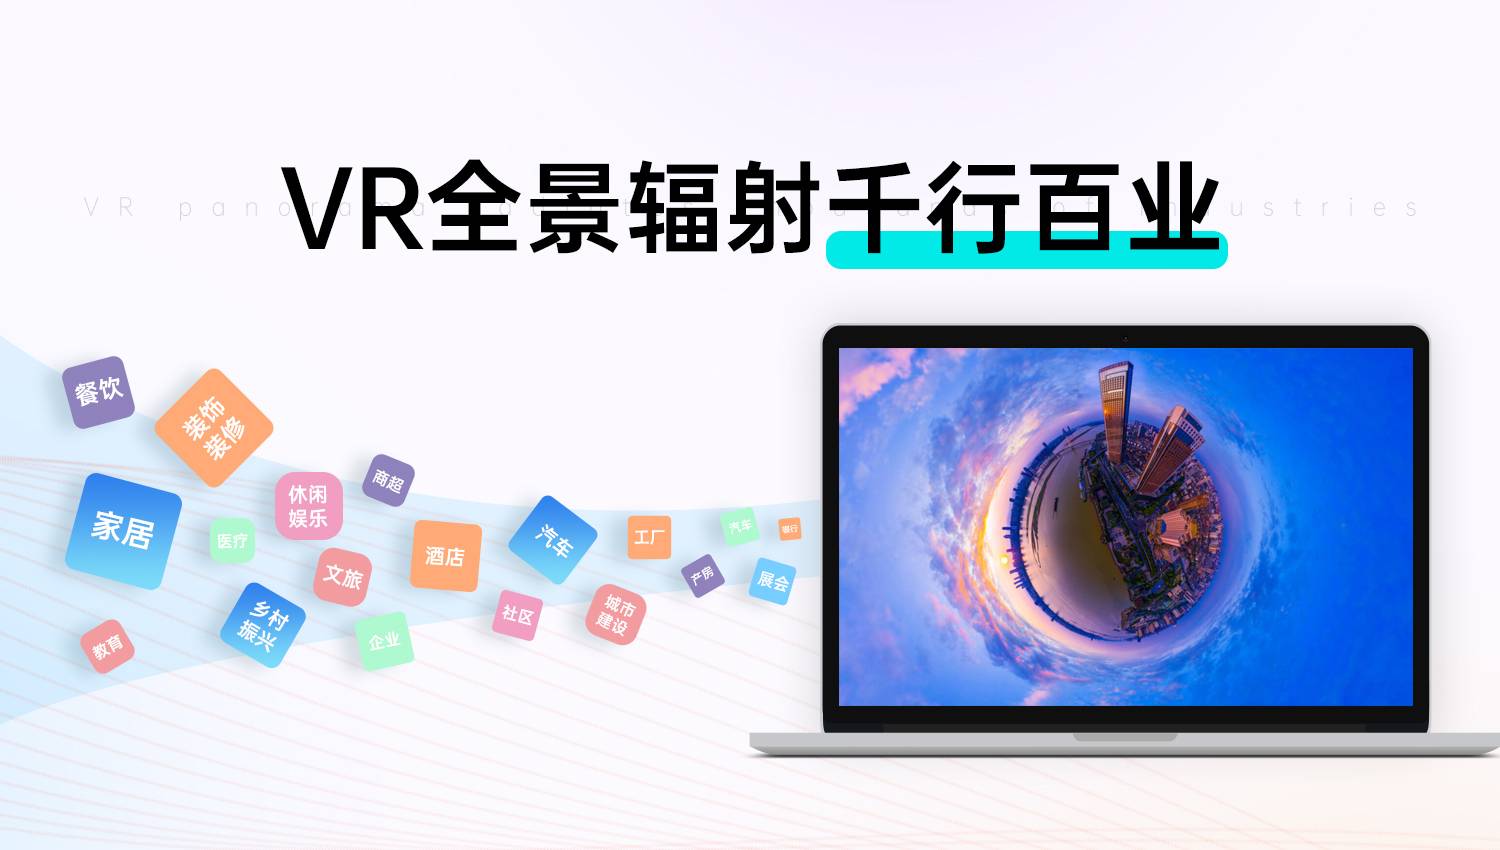 How to carry out the VR panorama franchise project?  How to win the dividends of the VR era?